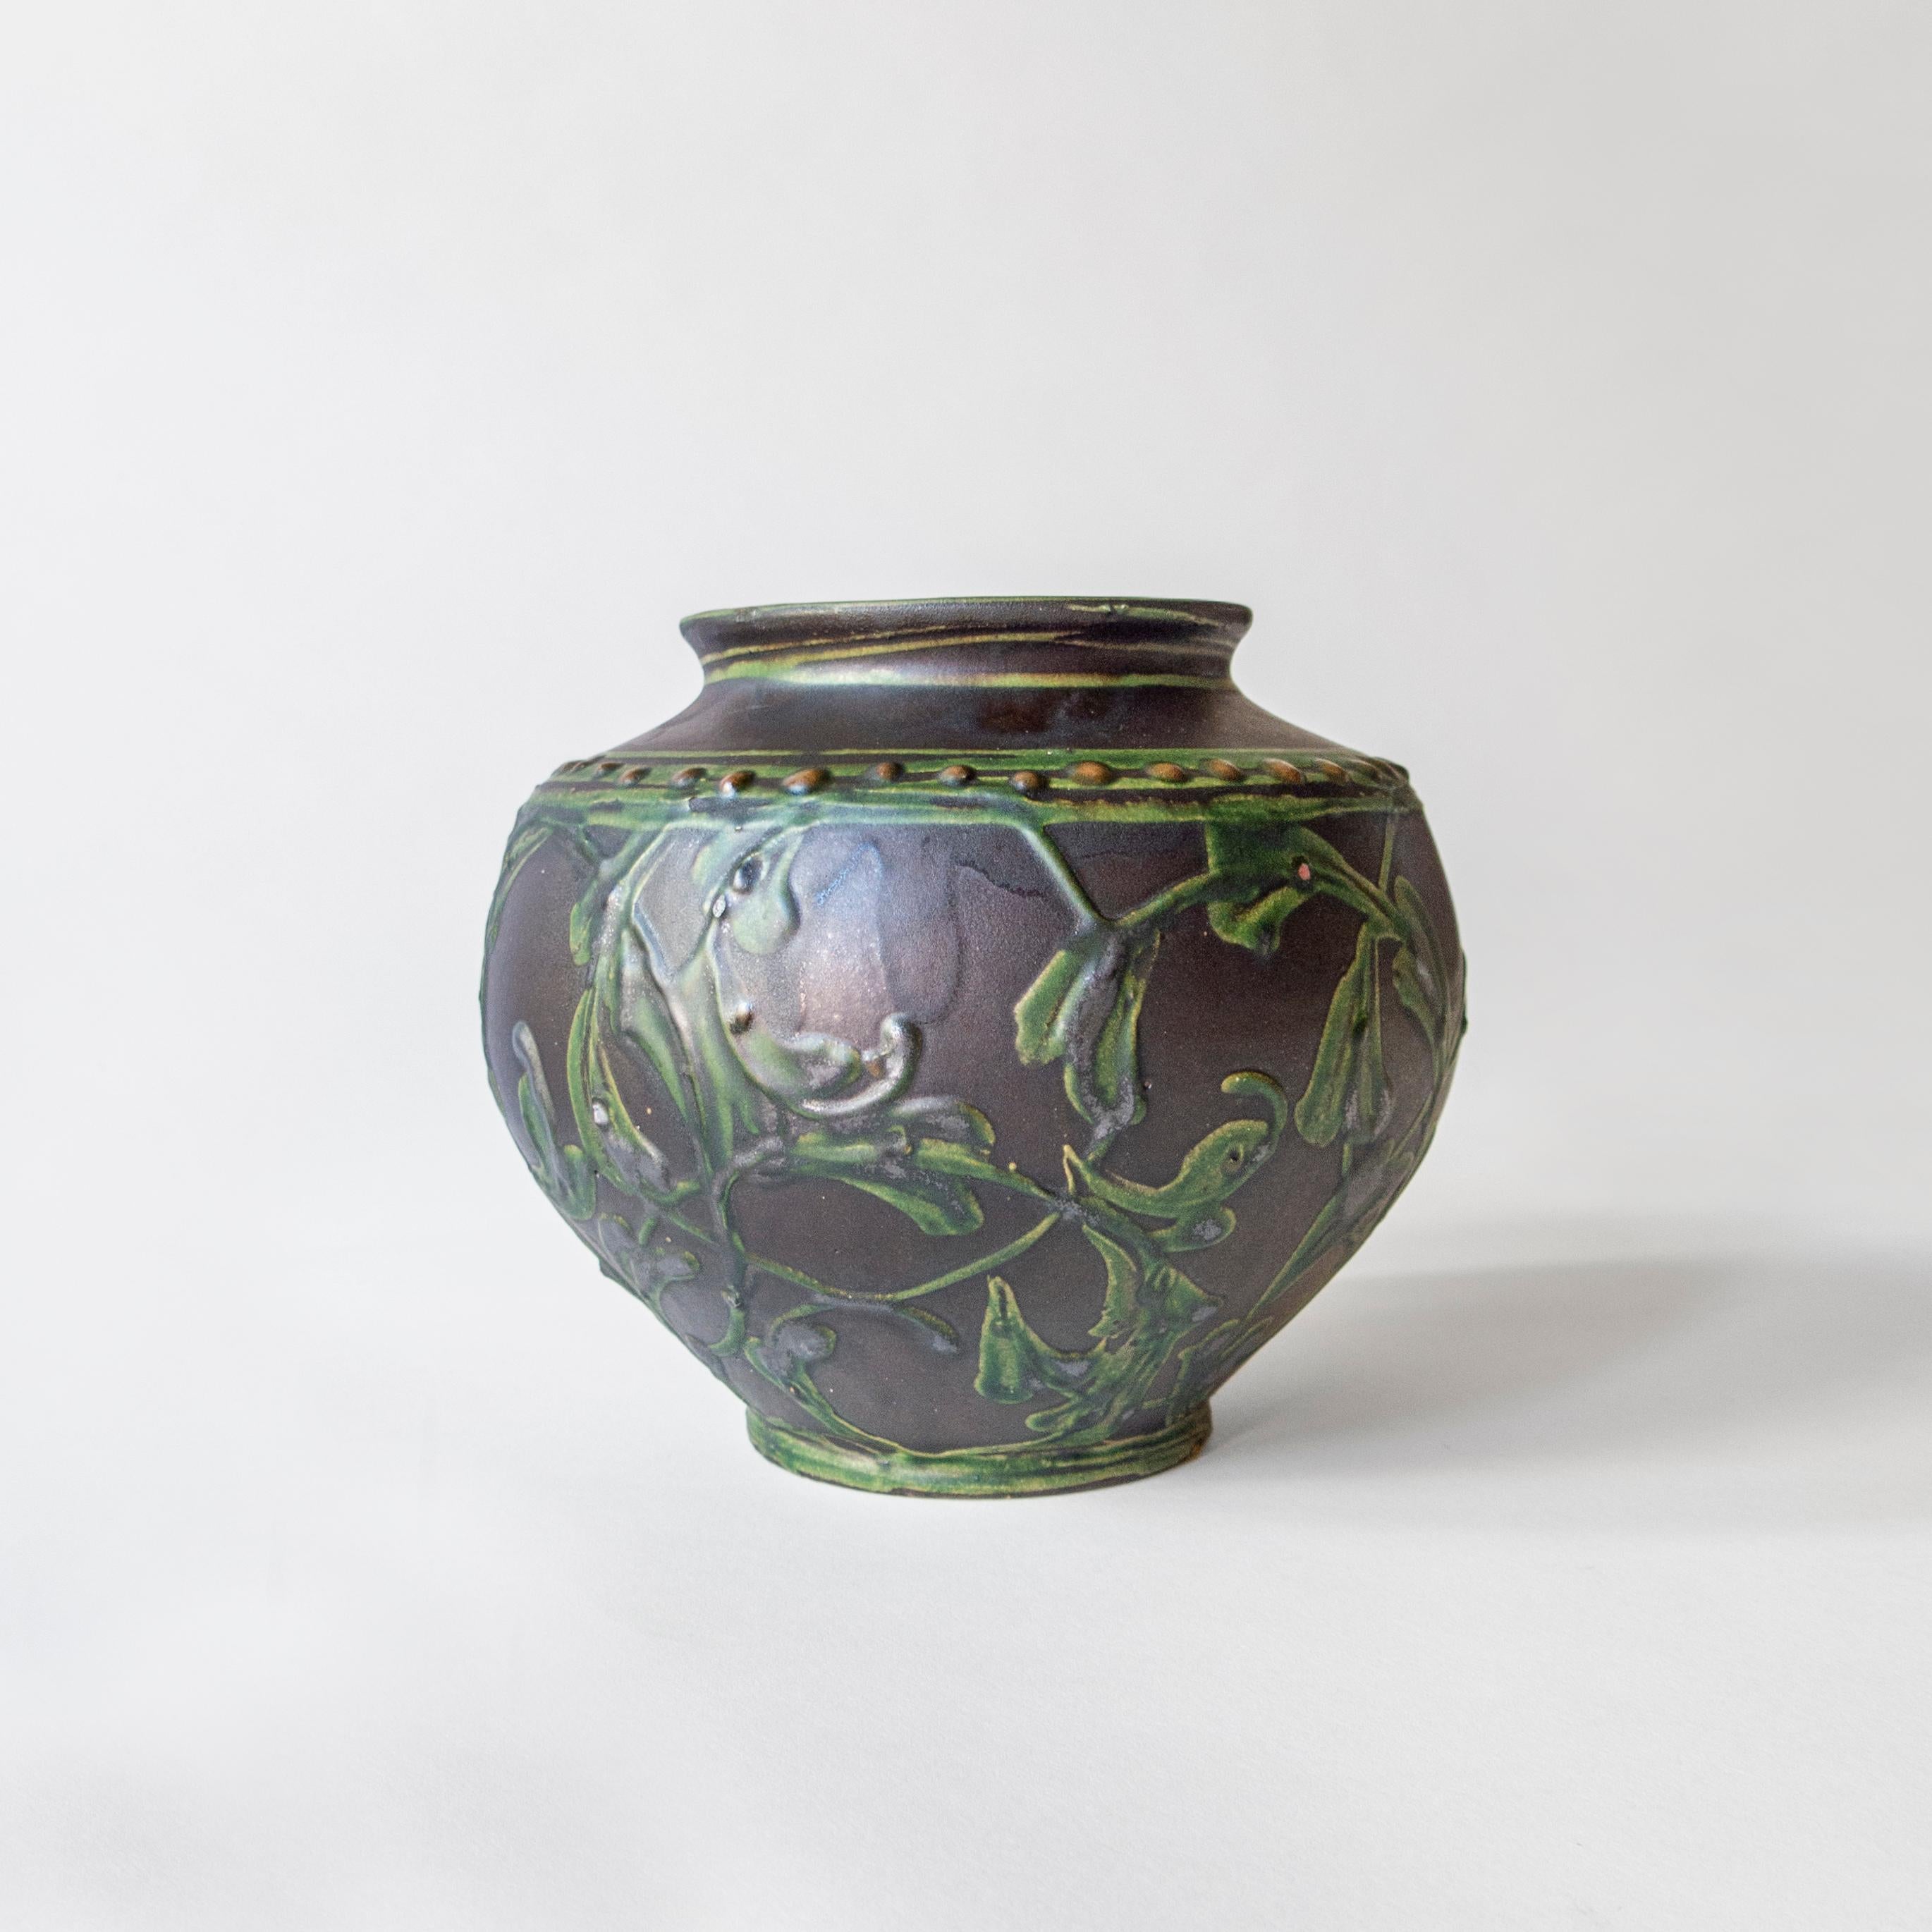 Each hand decorated with foliate pattern in bas relief, glazed in various shades of blue, green, and dark gray with umber accents. Each signed underneath: HAK

Vase: Height 7.75